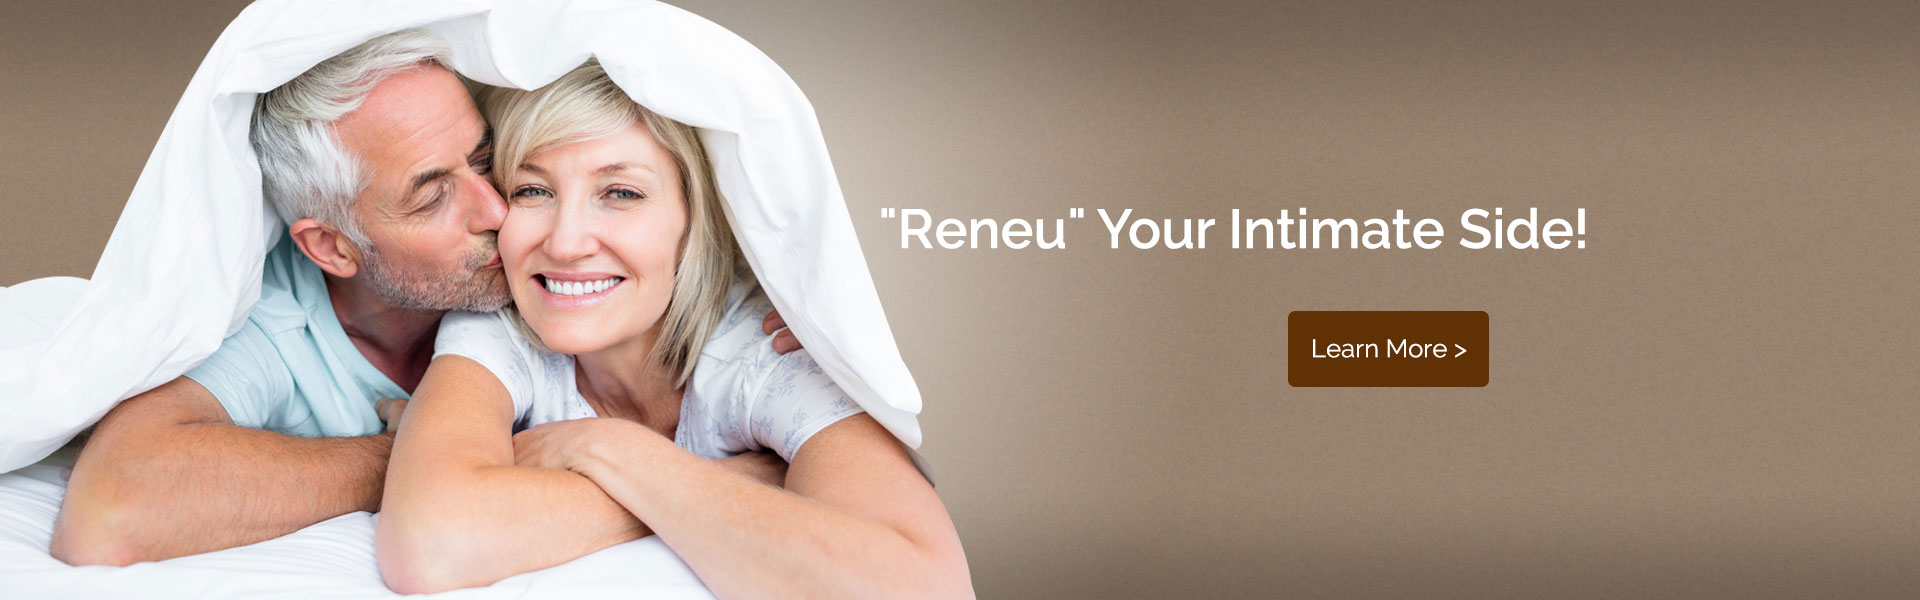 Reneu-Your-Intimate-Side